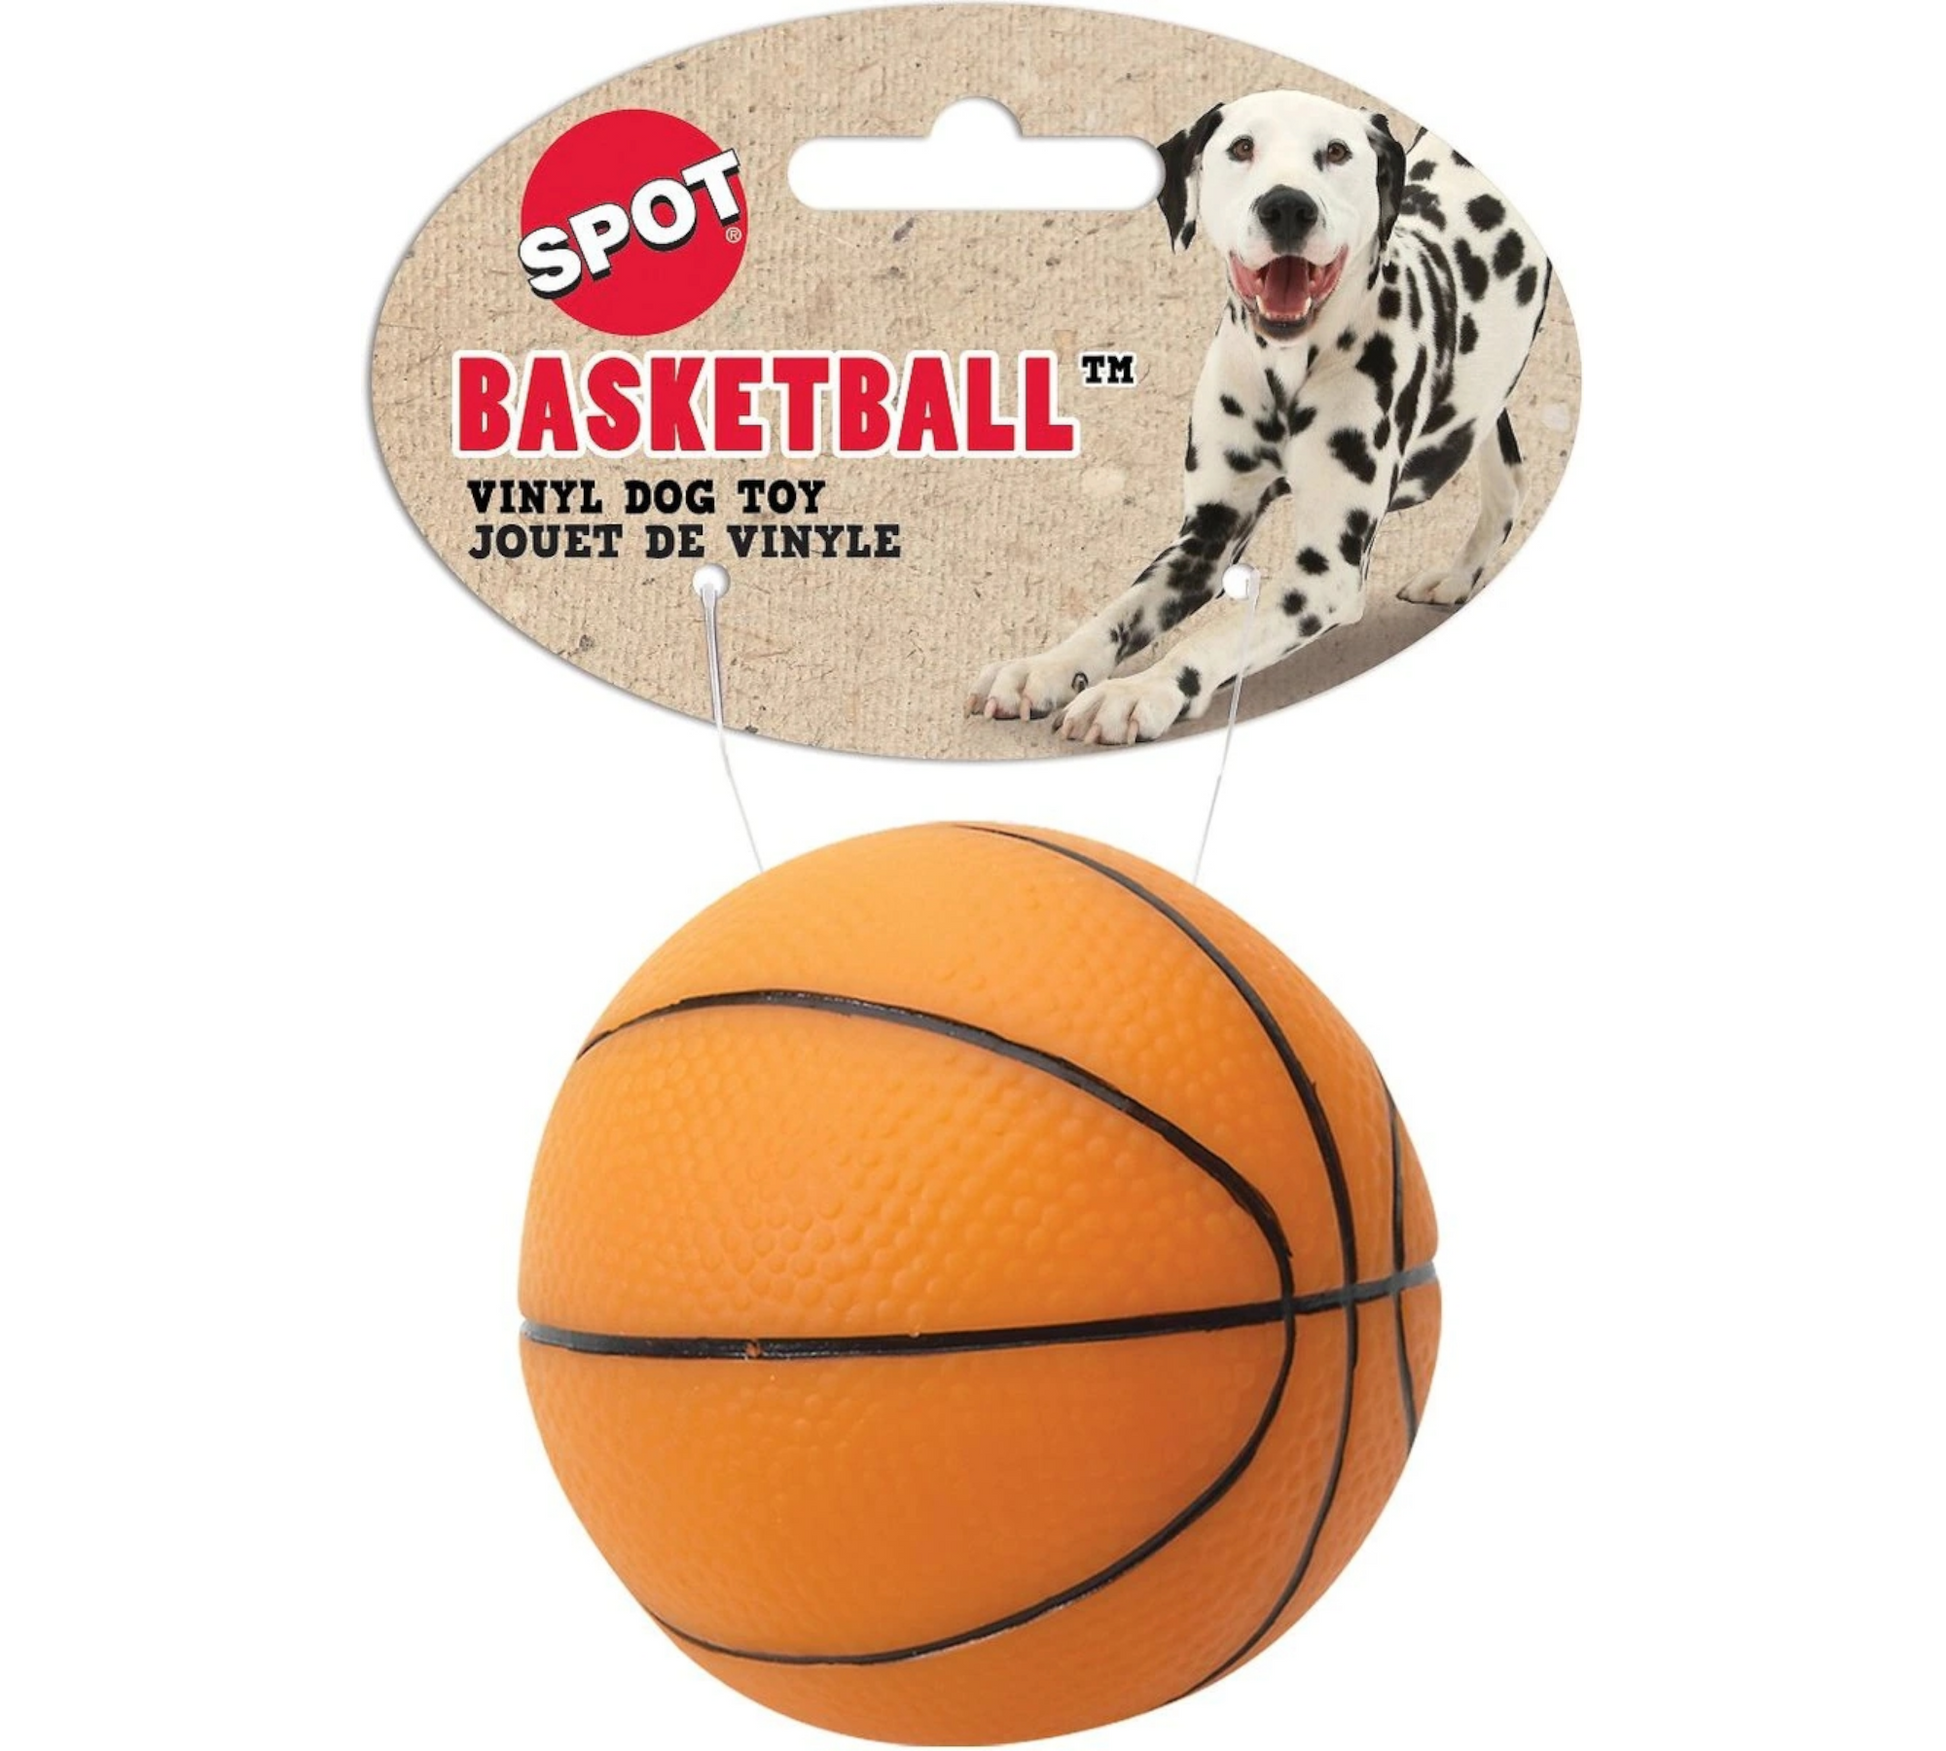 Canine's World Dog Ball Toys Spot Pet Vinyl Basketball Squeaky Dog Chew Toy, Color Varies, 3-in Spot